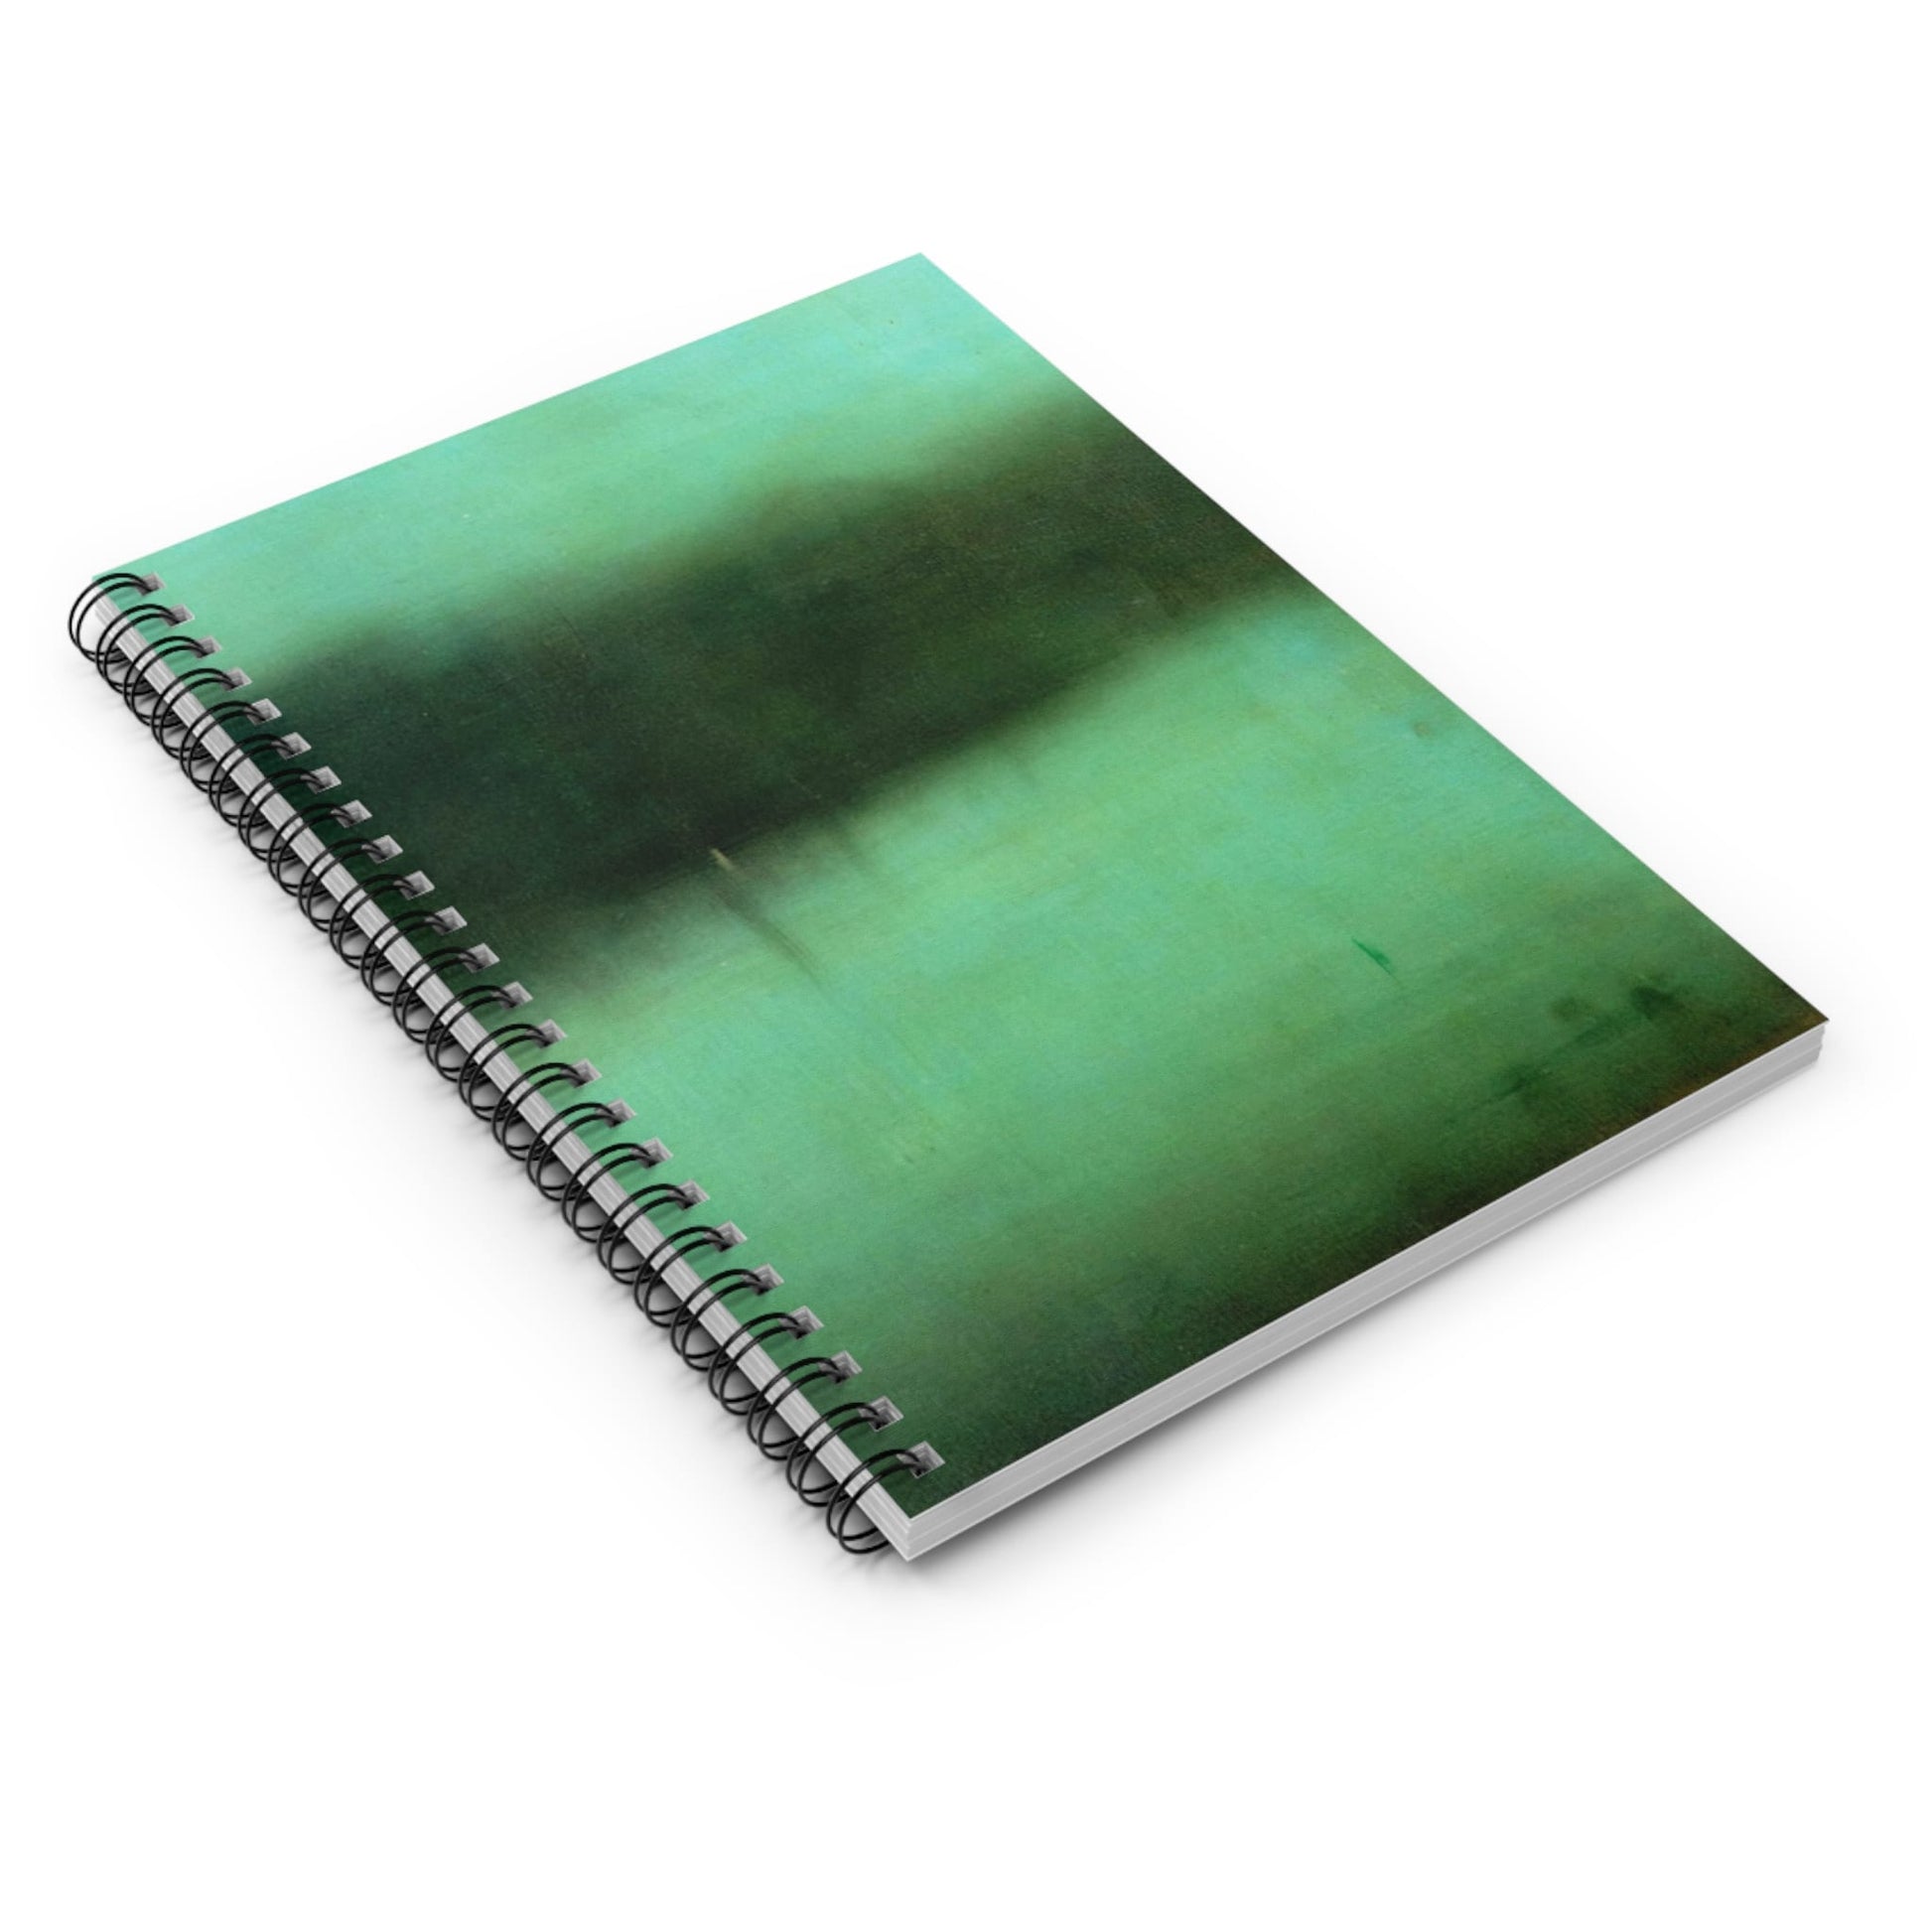 Black and Green Spiral Notebook Laying Flat on White Surface